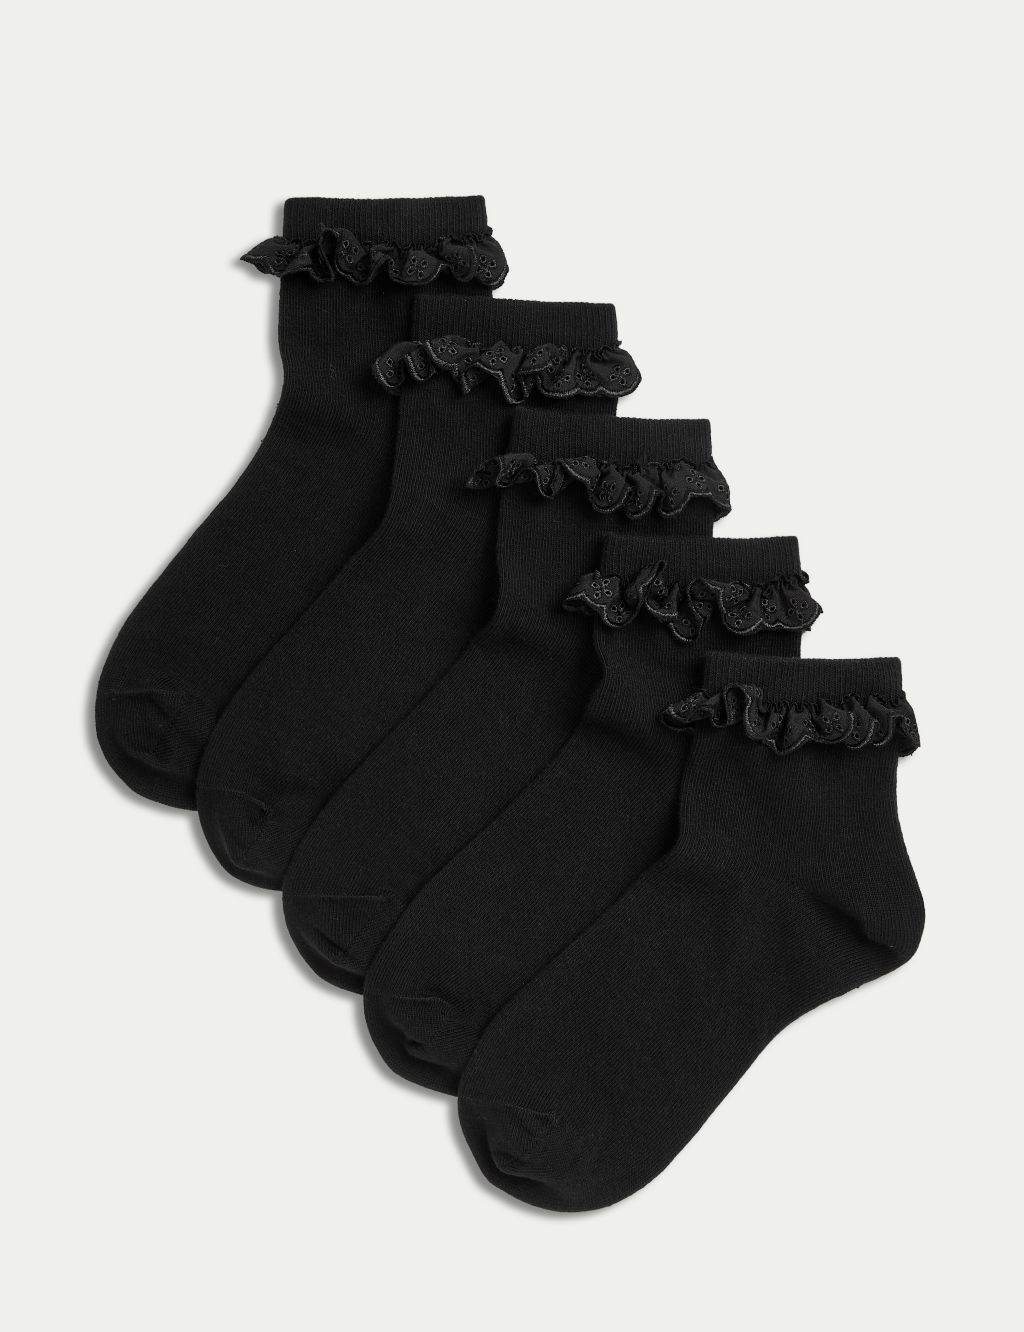 M&S Girls School Tights 9-10 Years Black (3) - Compare Prices